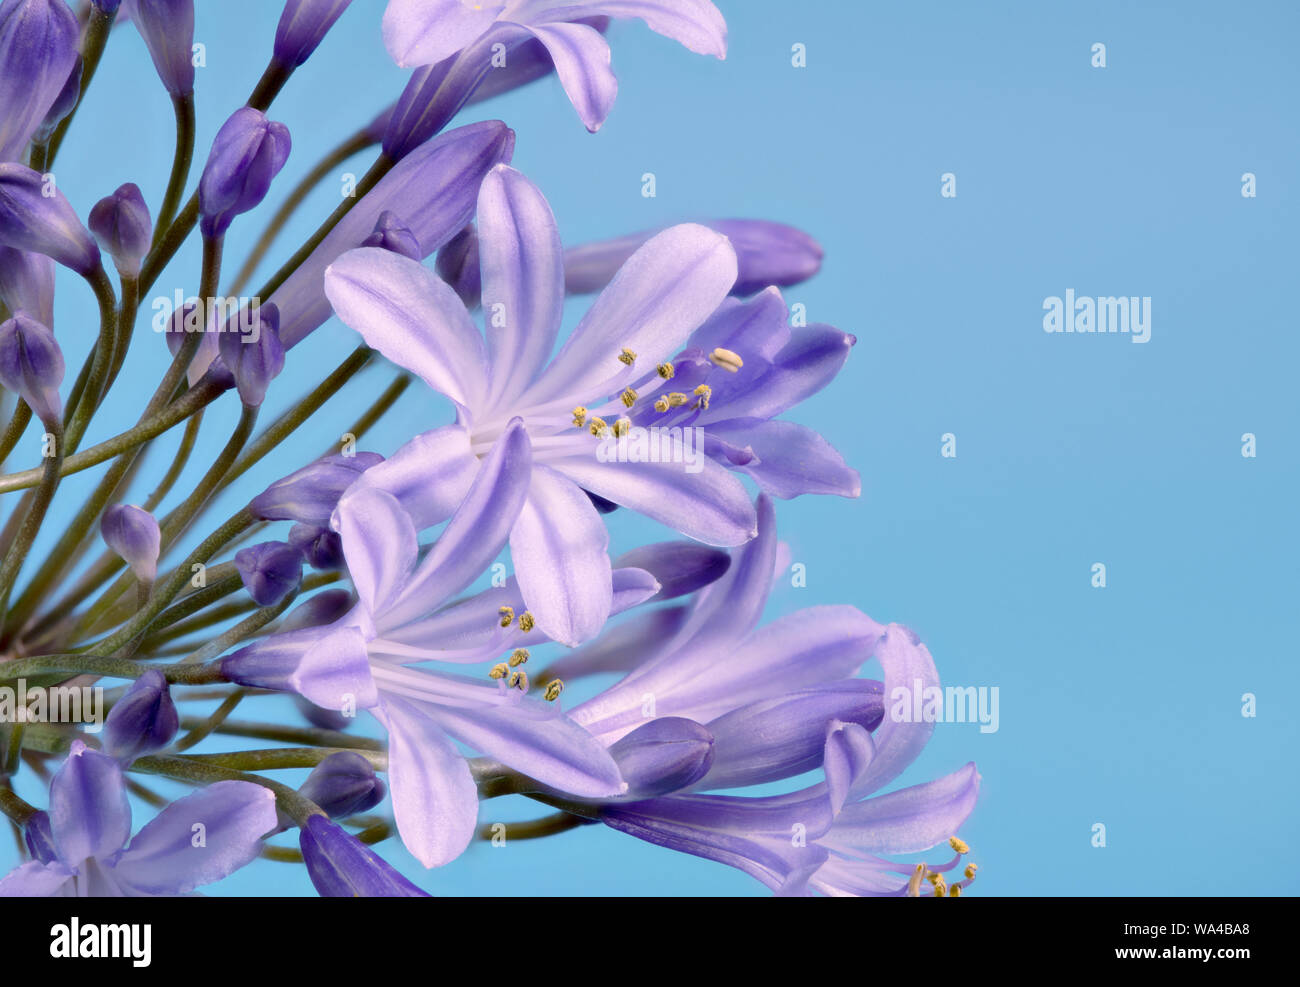 Beautiful star shaped blue Agapanthus flowers photographed against a bright blue background Stock Photo